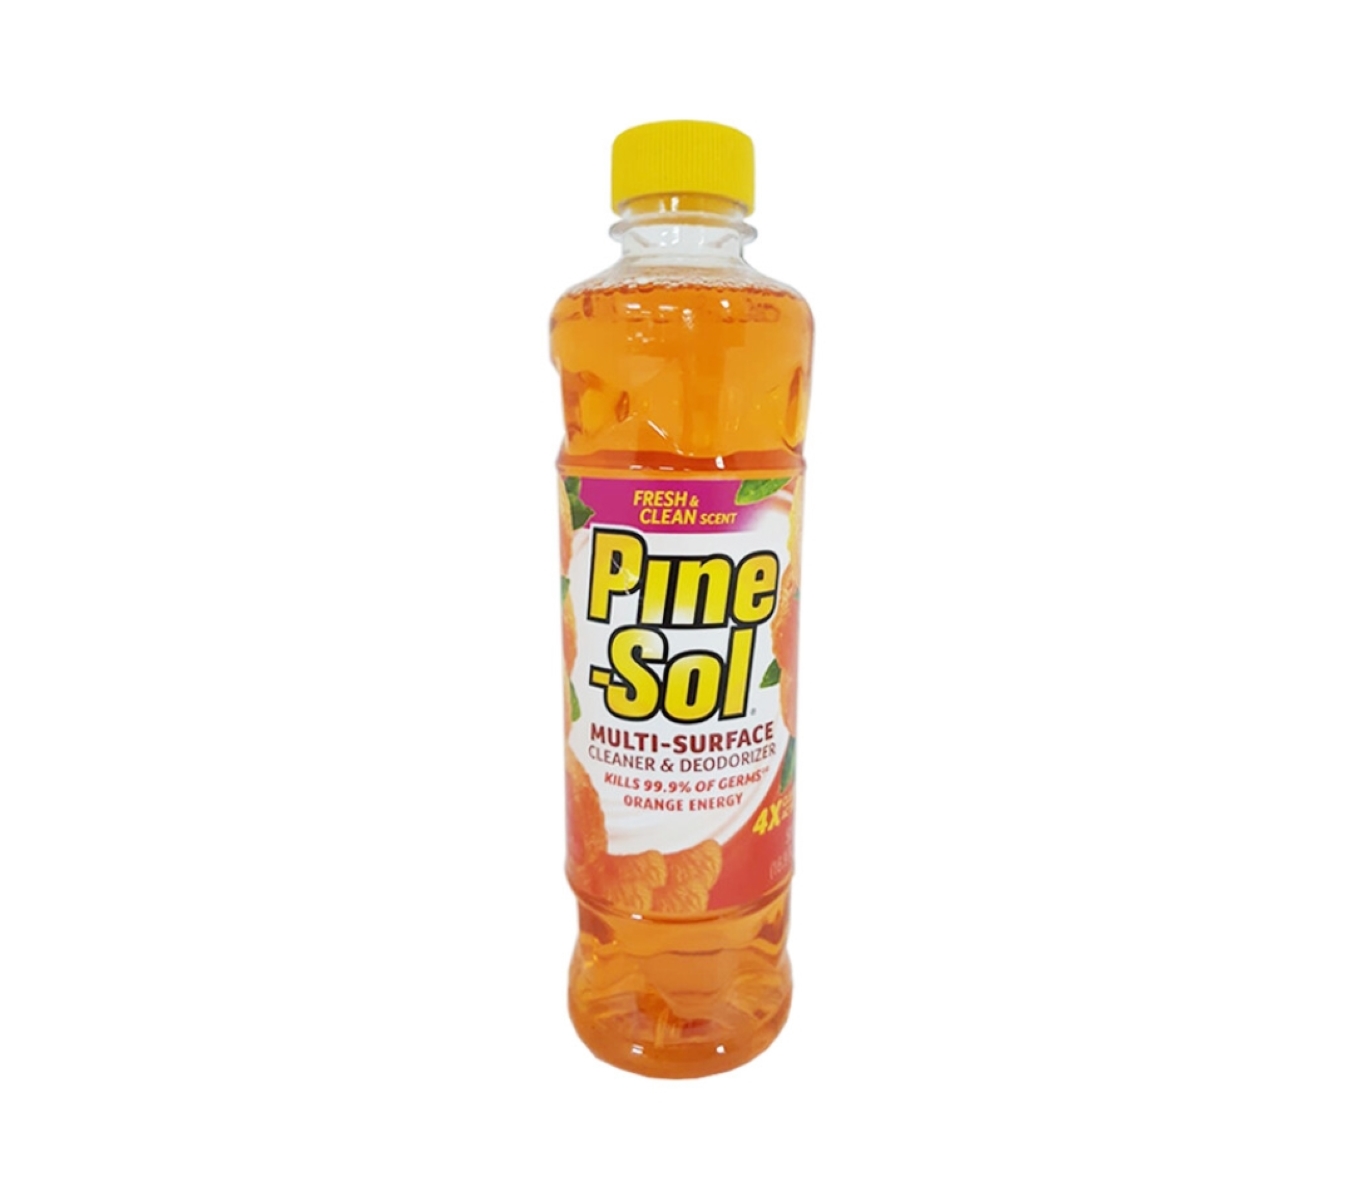 How Much Of Pine Sol Multi Surface Cleaner Deodorizer Lemon Fresh Equals Powdered Cleanser